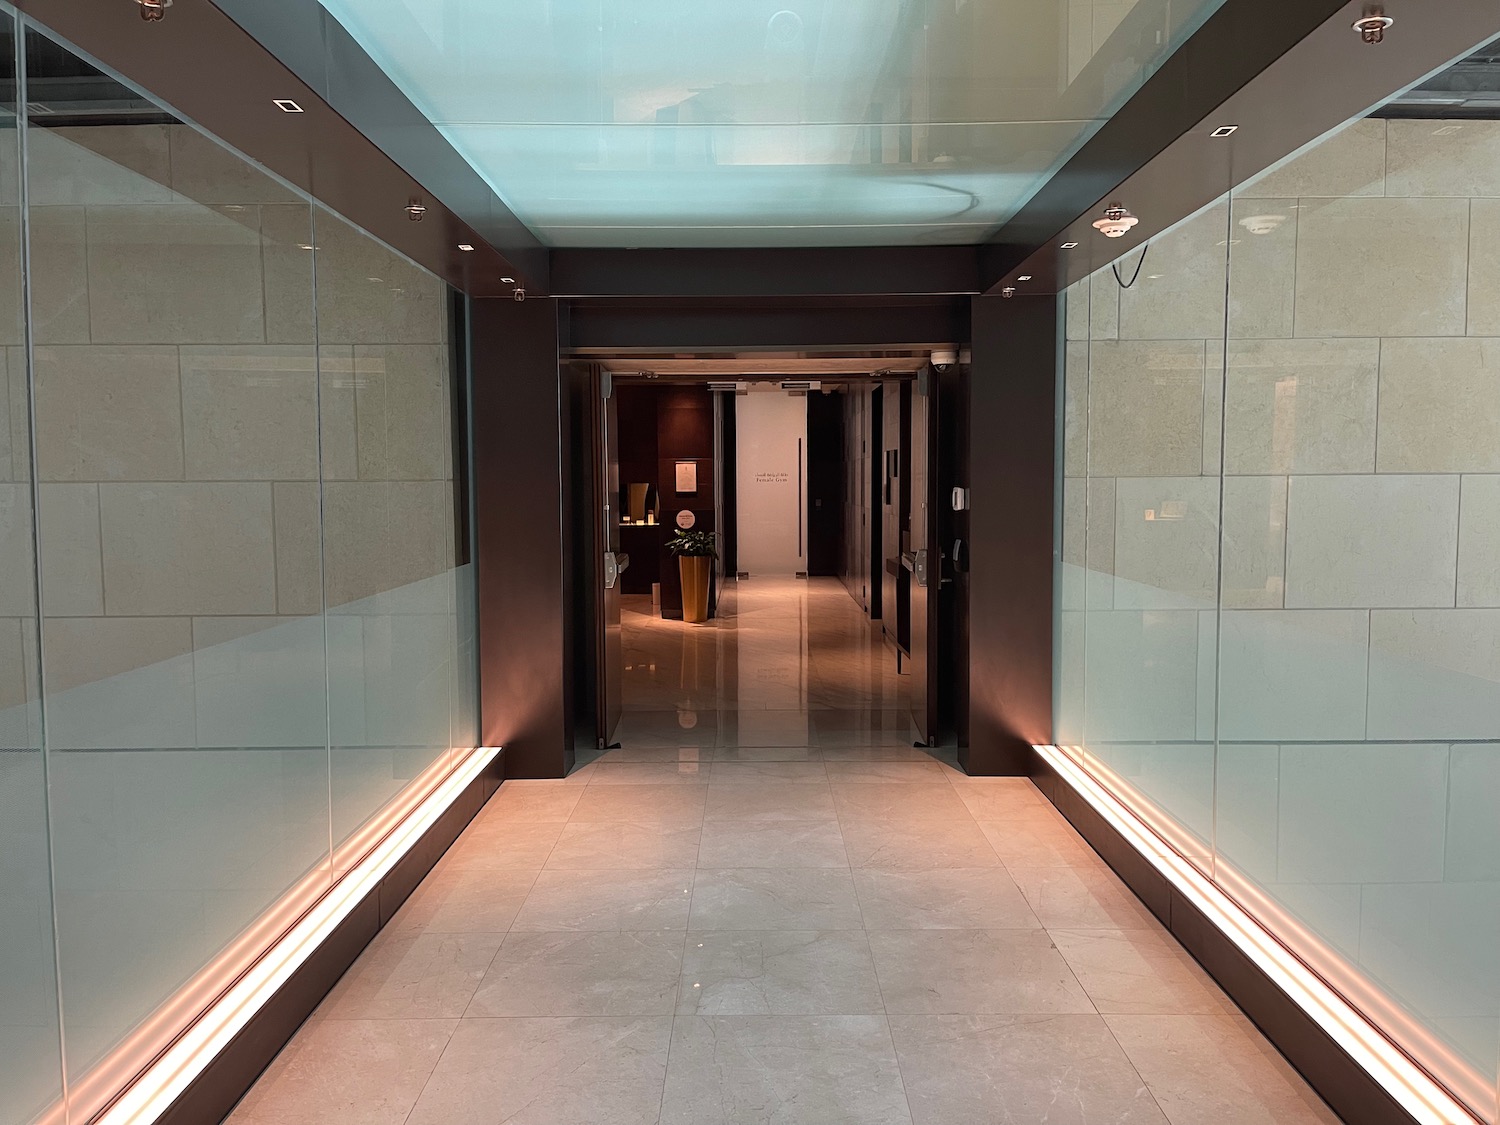 a hallway with glass walls and a light on the ceiling